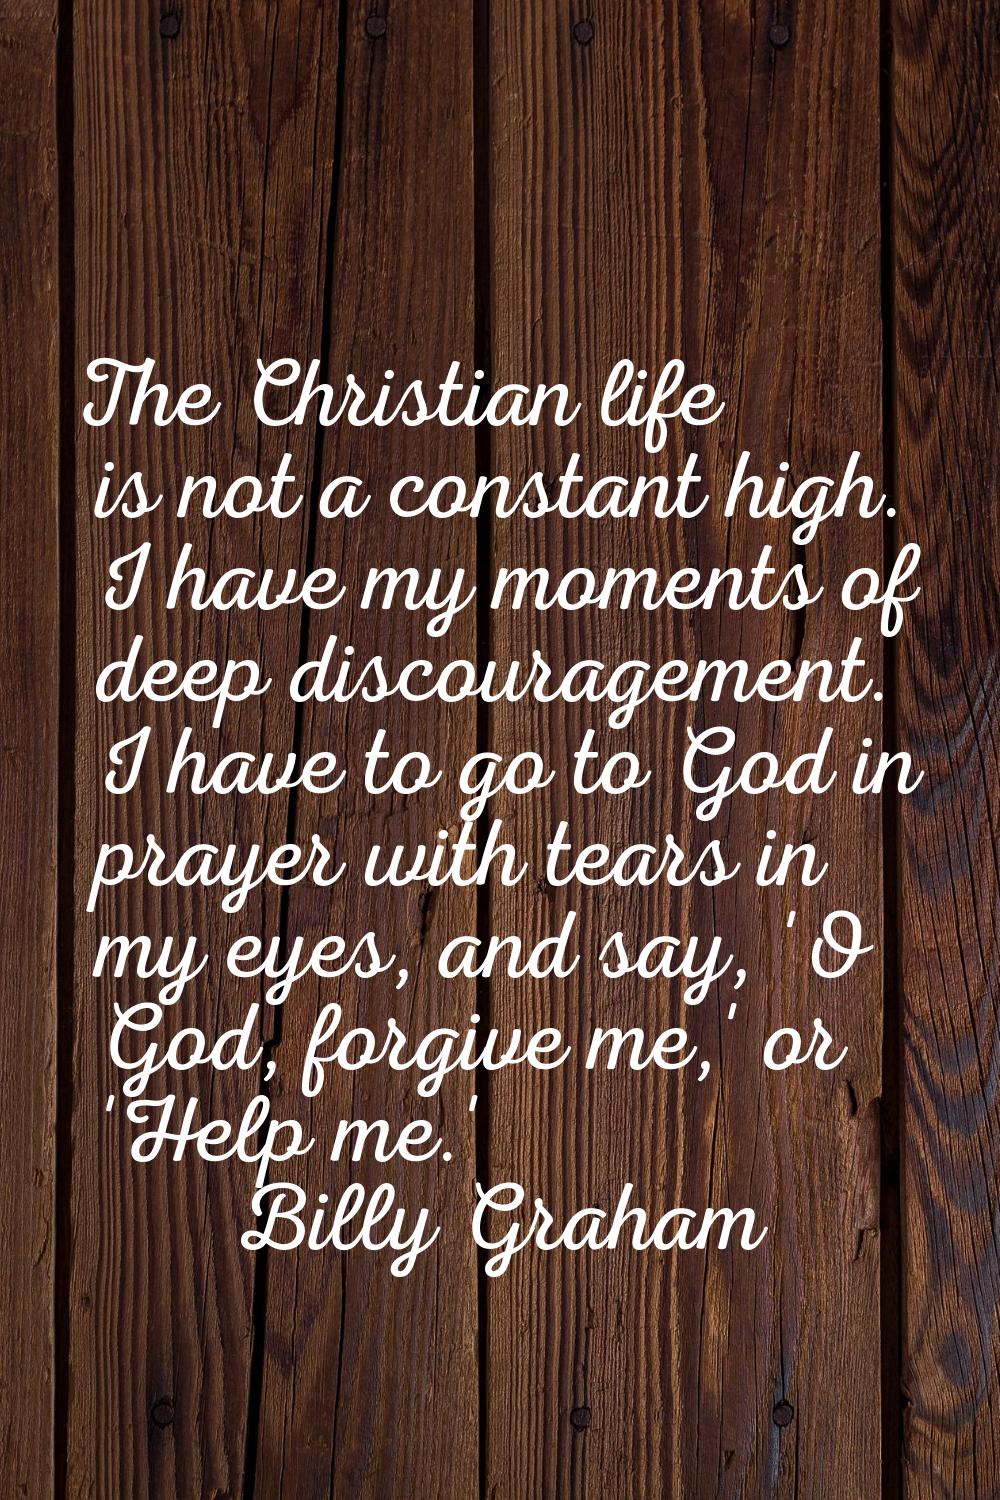 The Christian life is not a constant high. I have my moments of deep discouragement. I have to go t